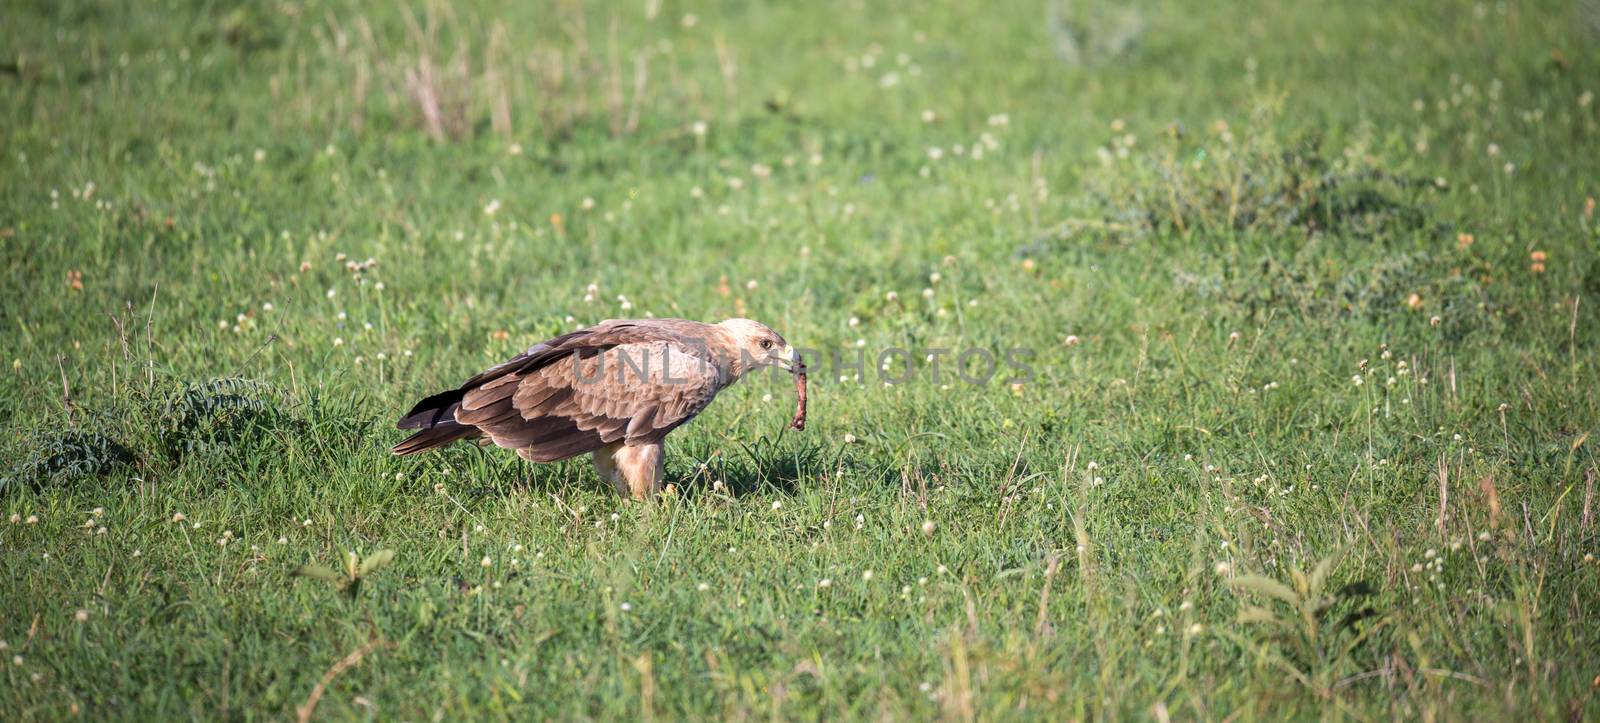 The eagle in the middle of the grassland in a meadow